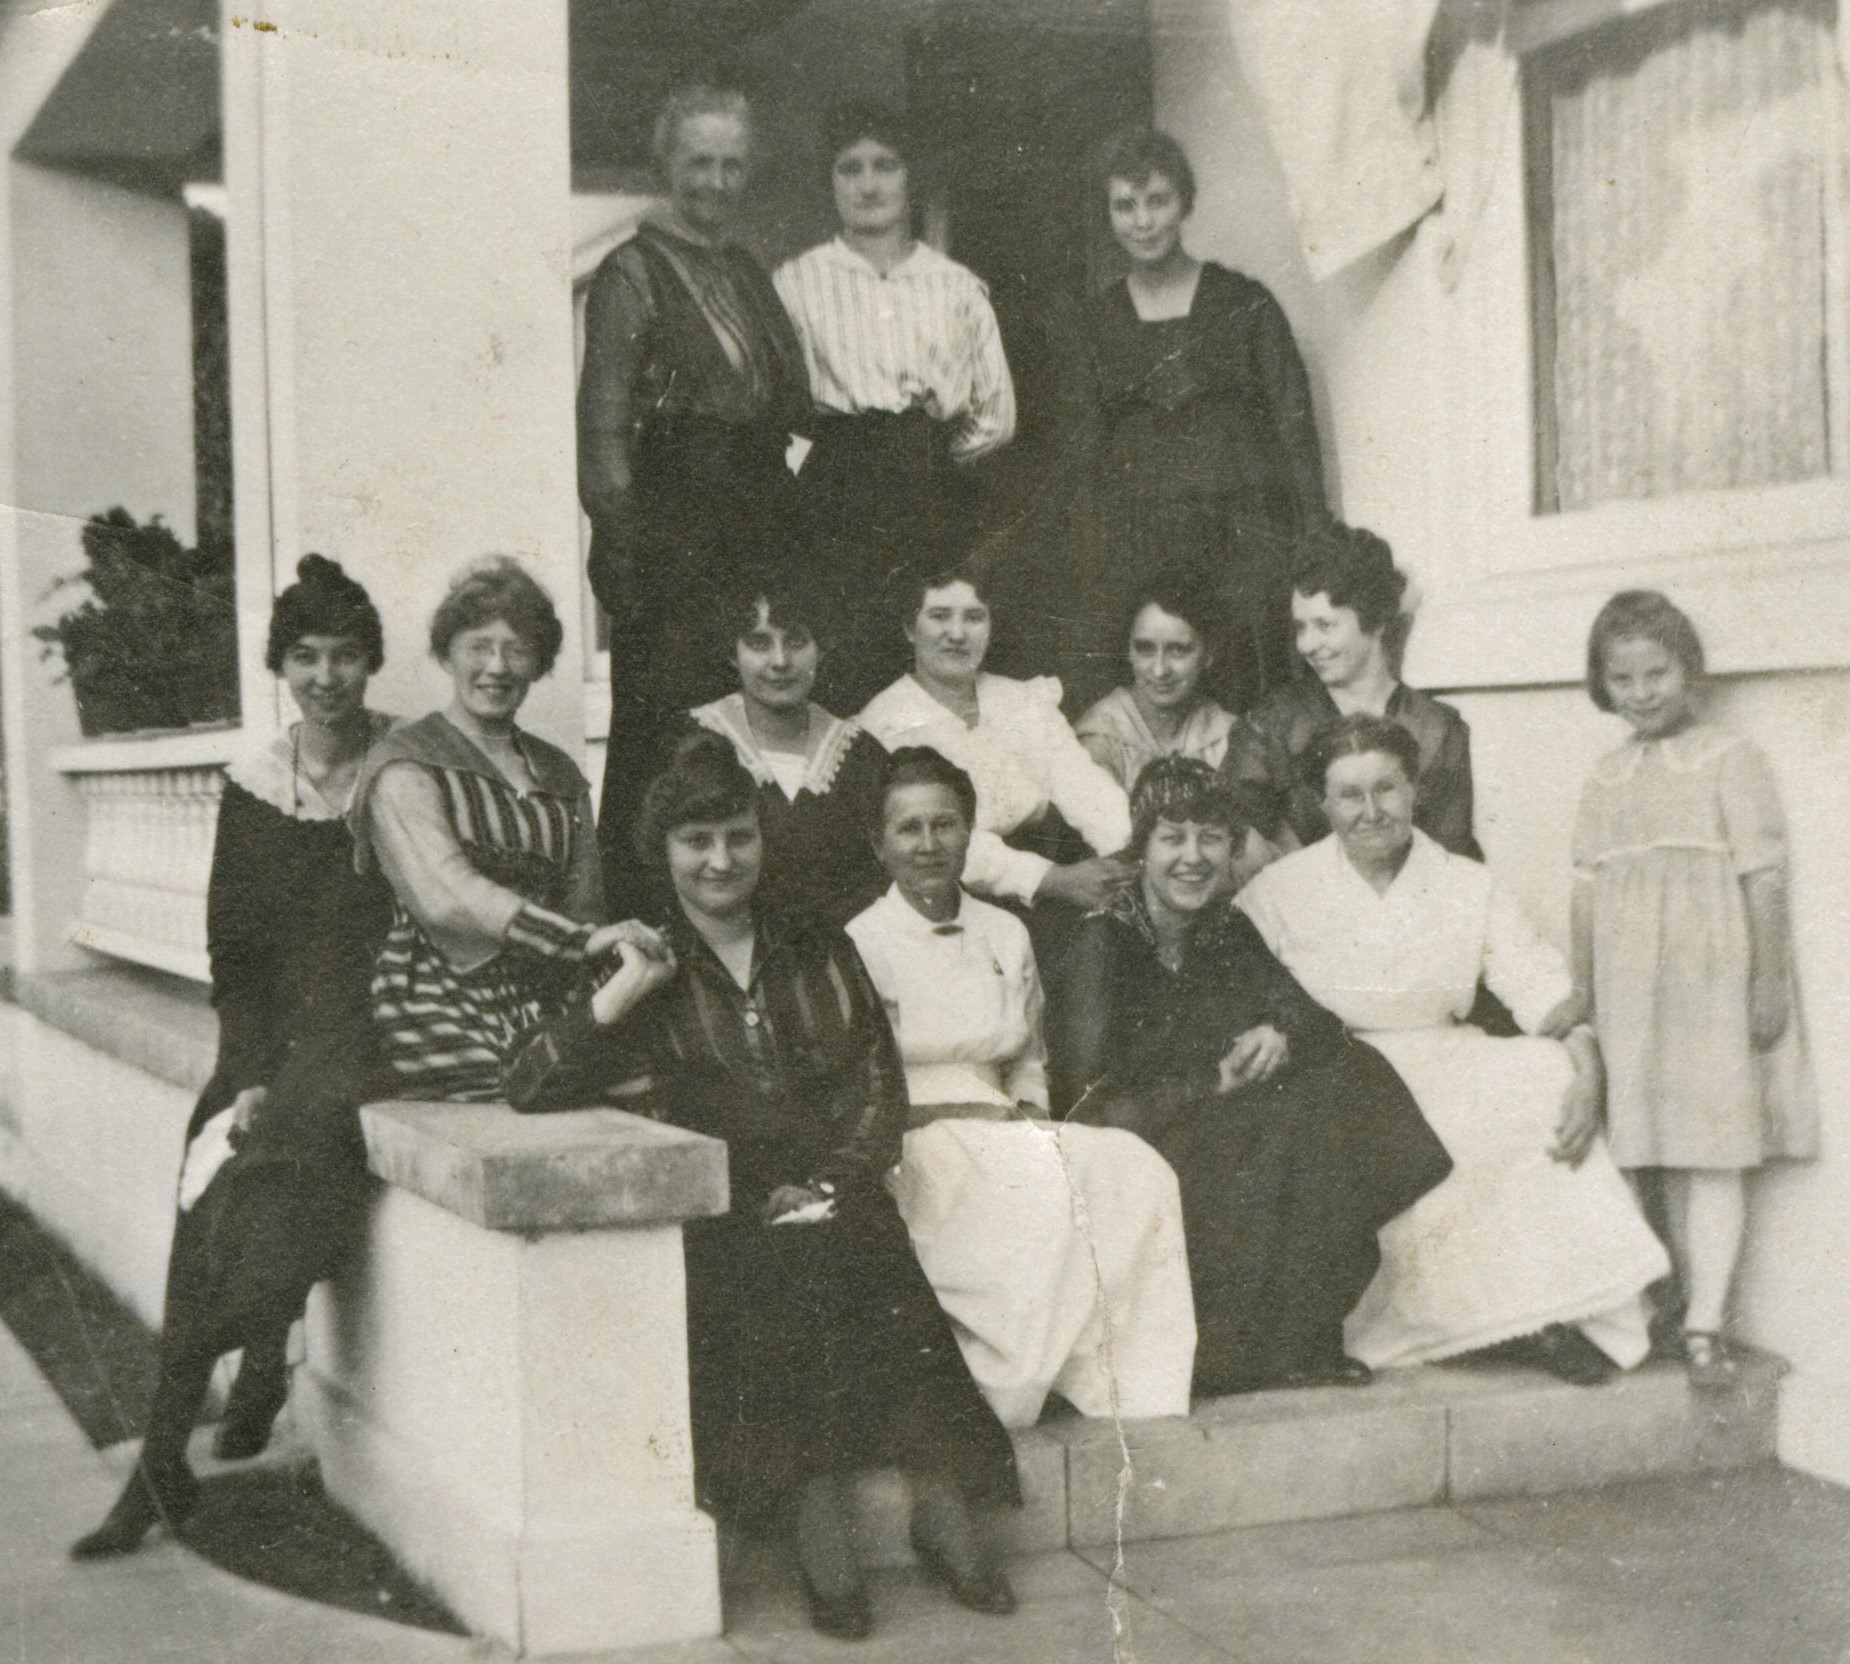 Lady Missionaries at mission headquarters, Oct. 23, 1917